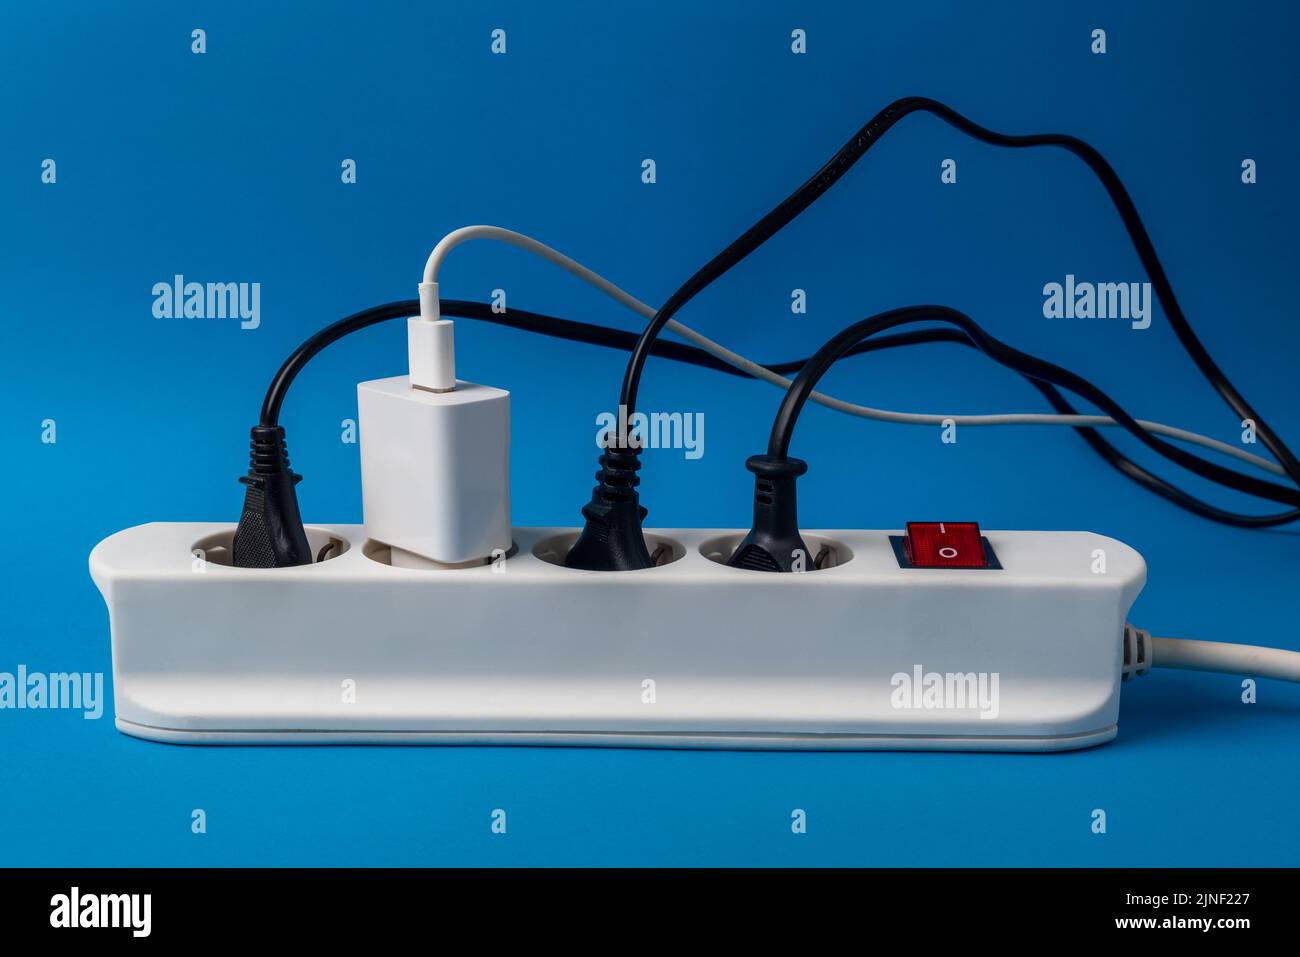 Multi-plug power strip with many connected devices on blue background. Concept of energy abuse. Waste and squandering of electricity Stock Photo